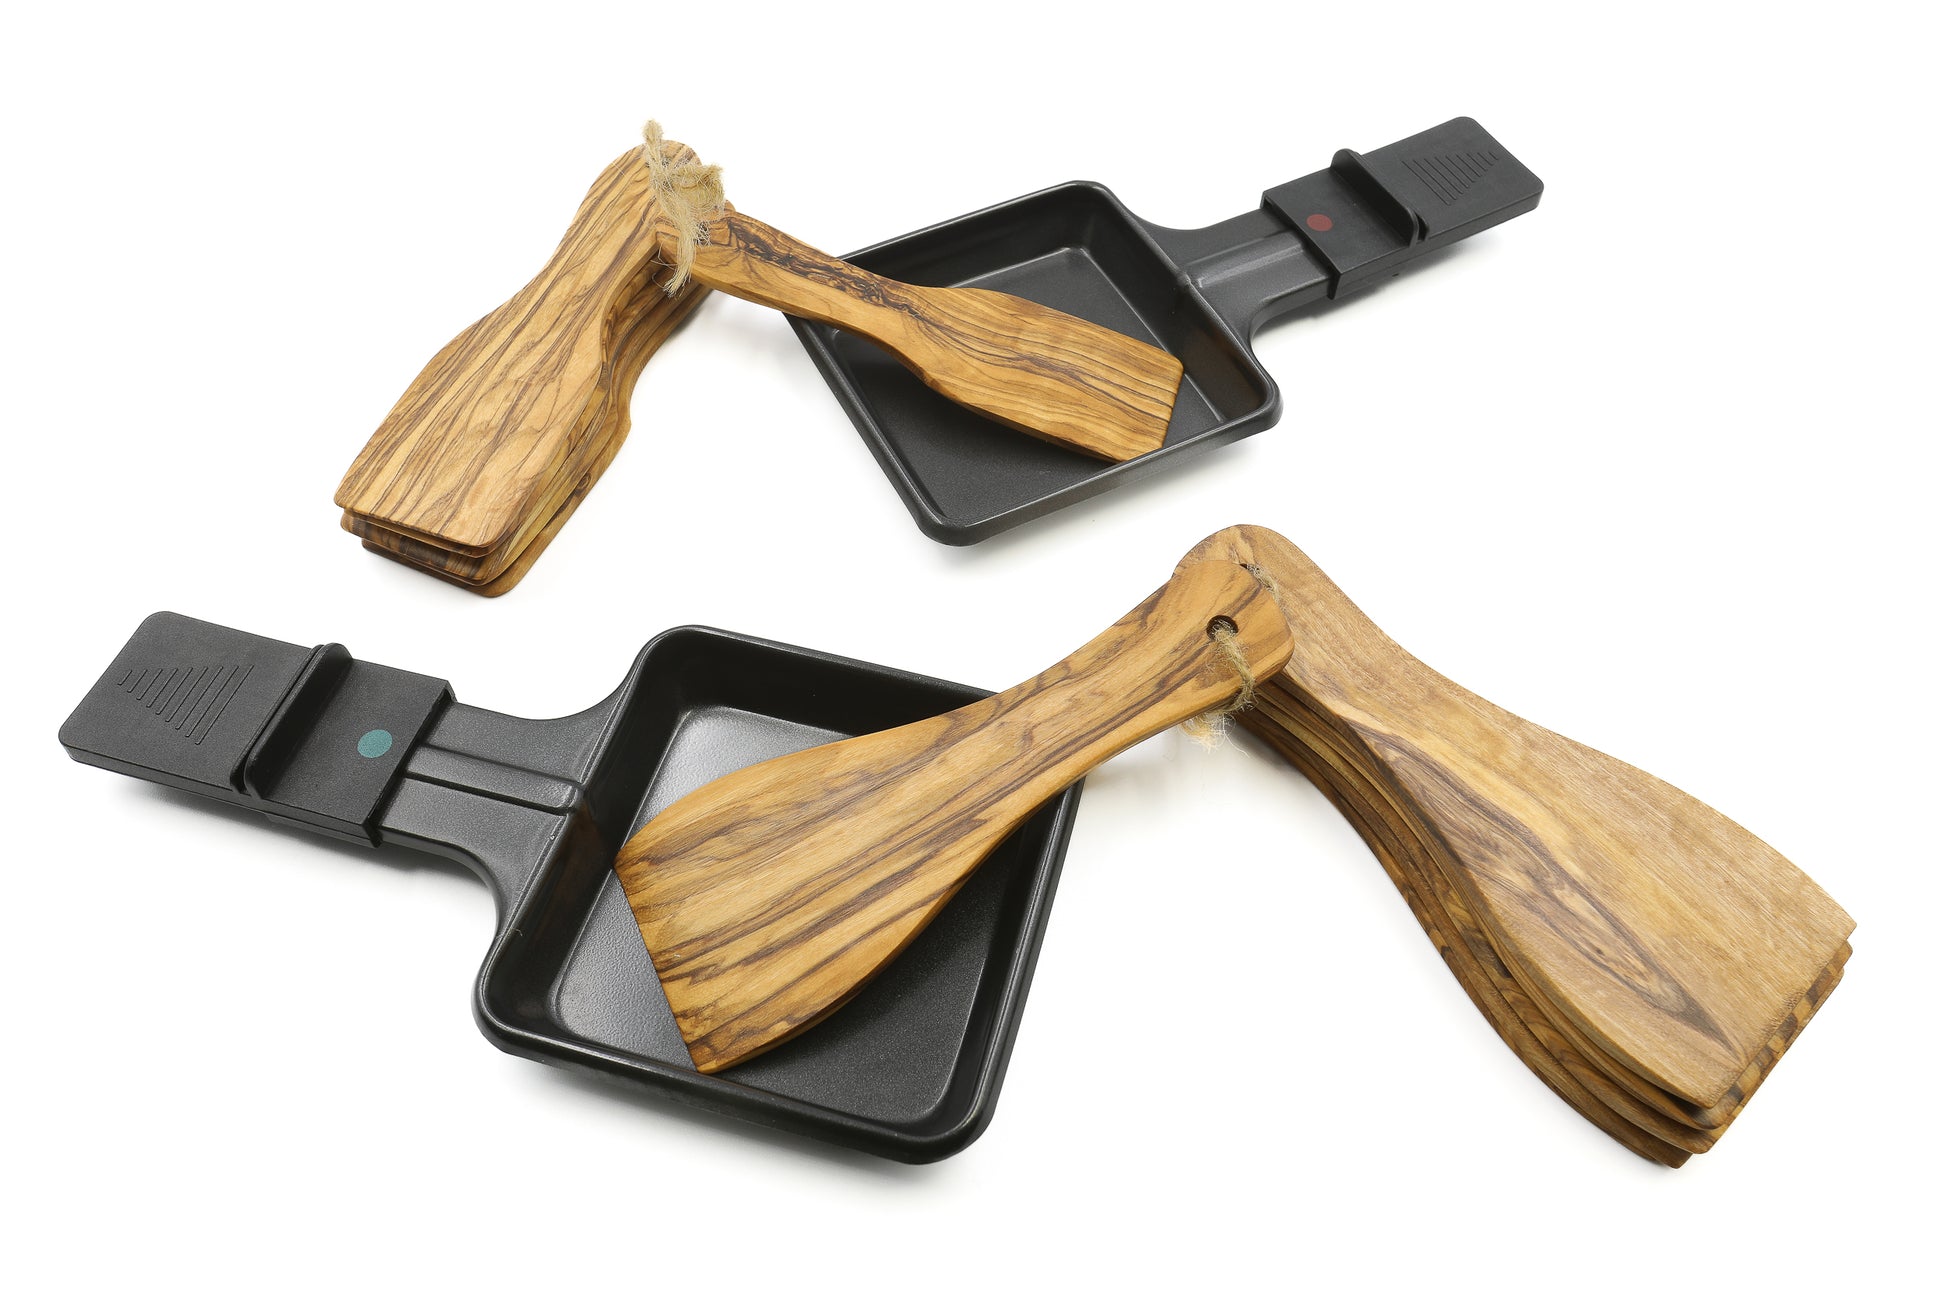 Handcrafted olive wood raclette spatulas in a set of 6 for gourmet dining